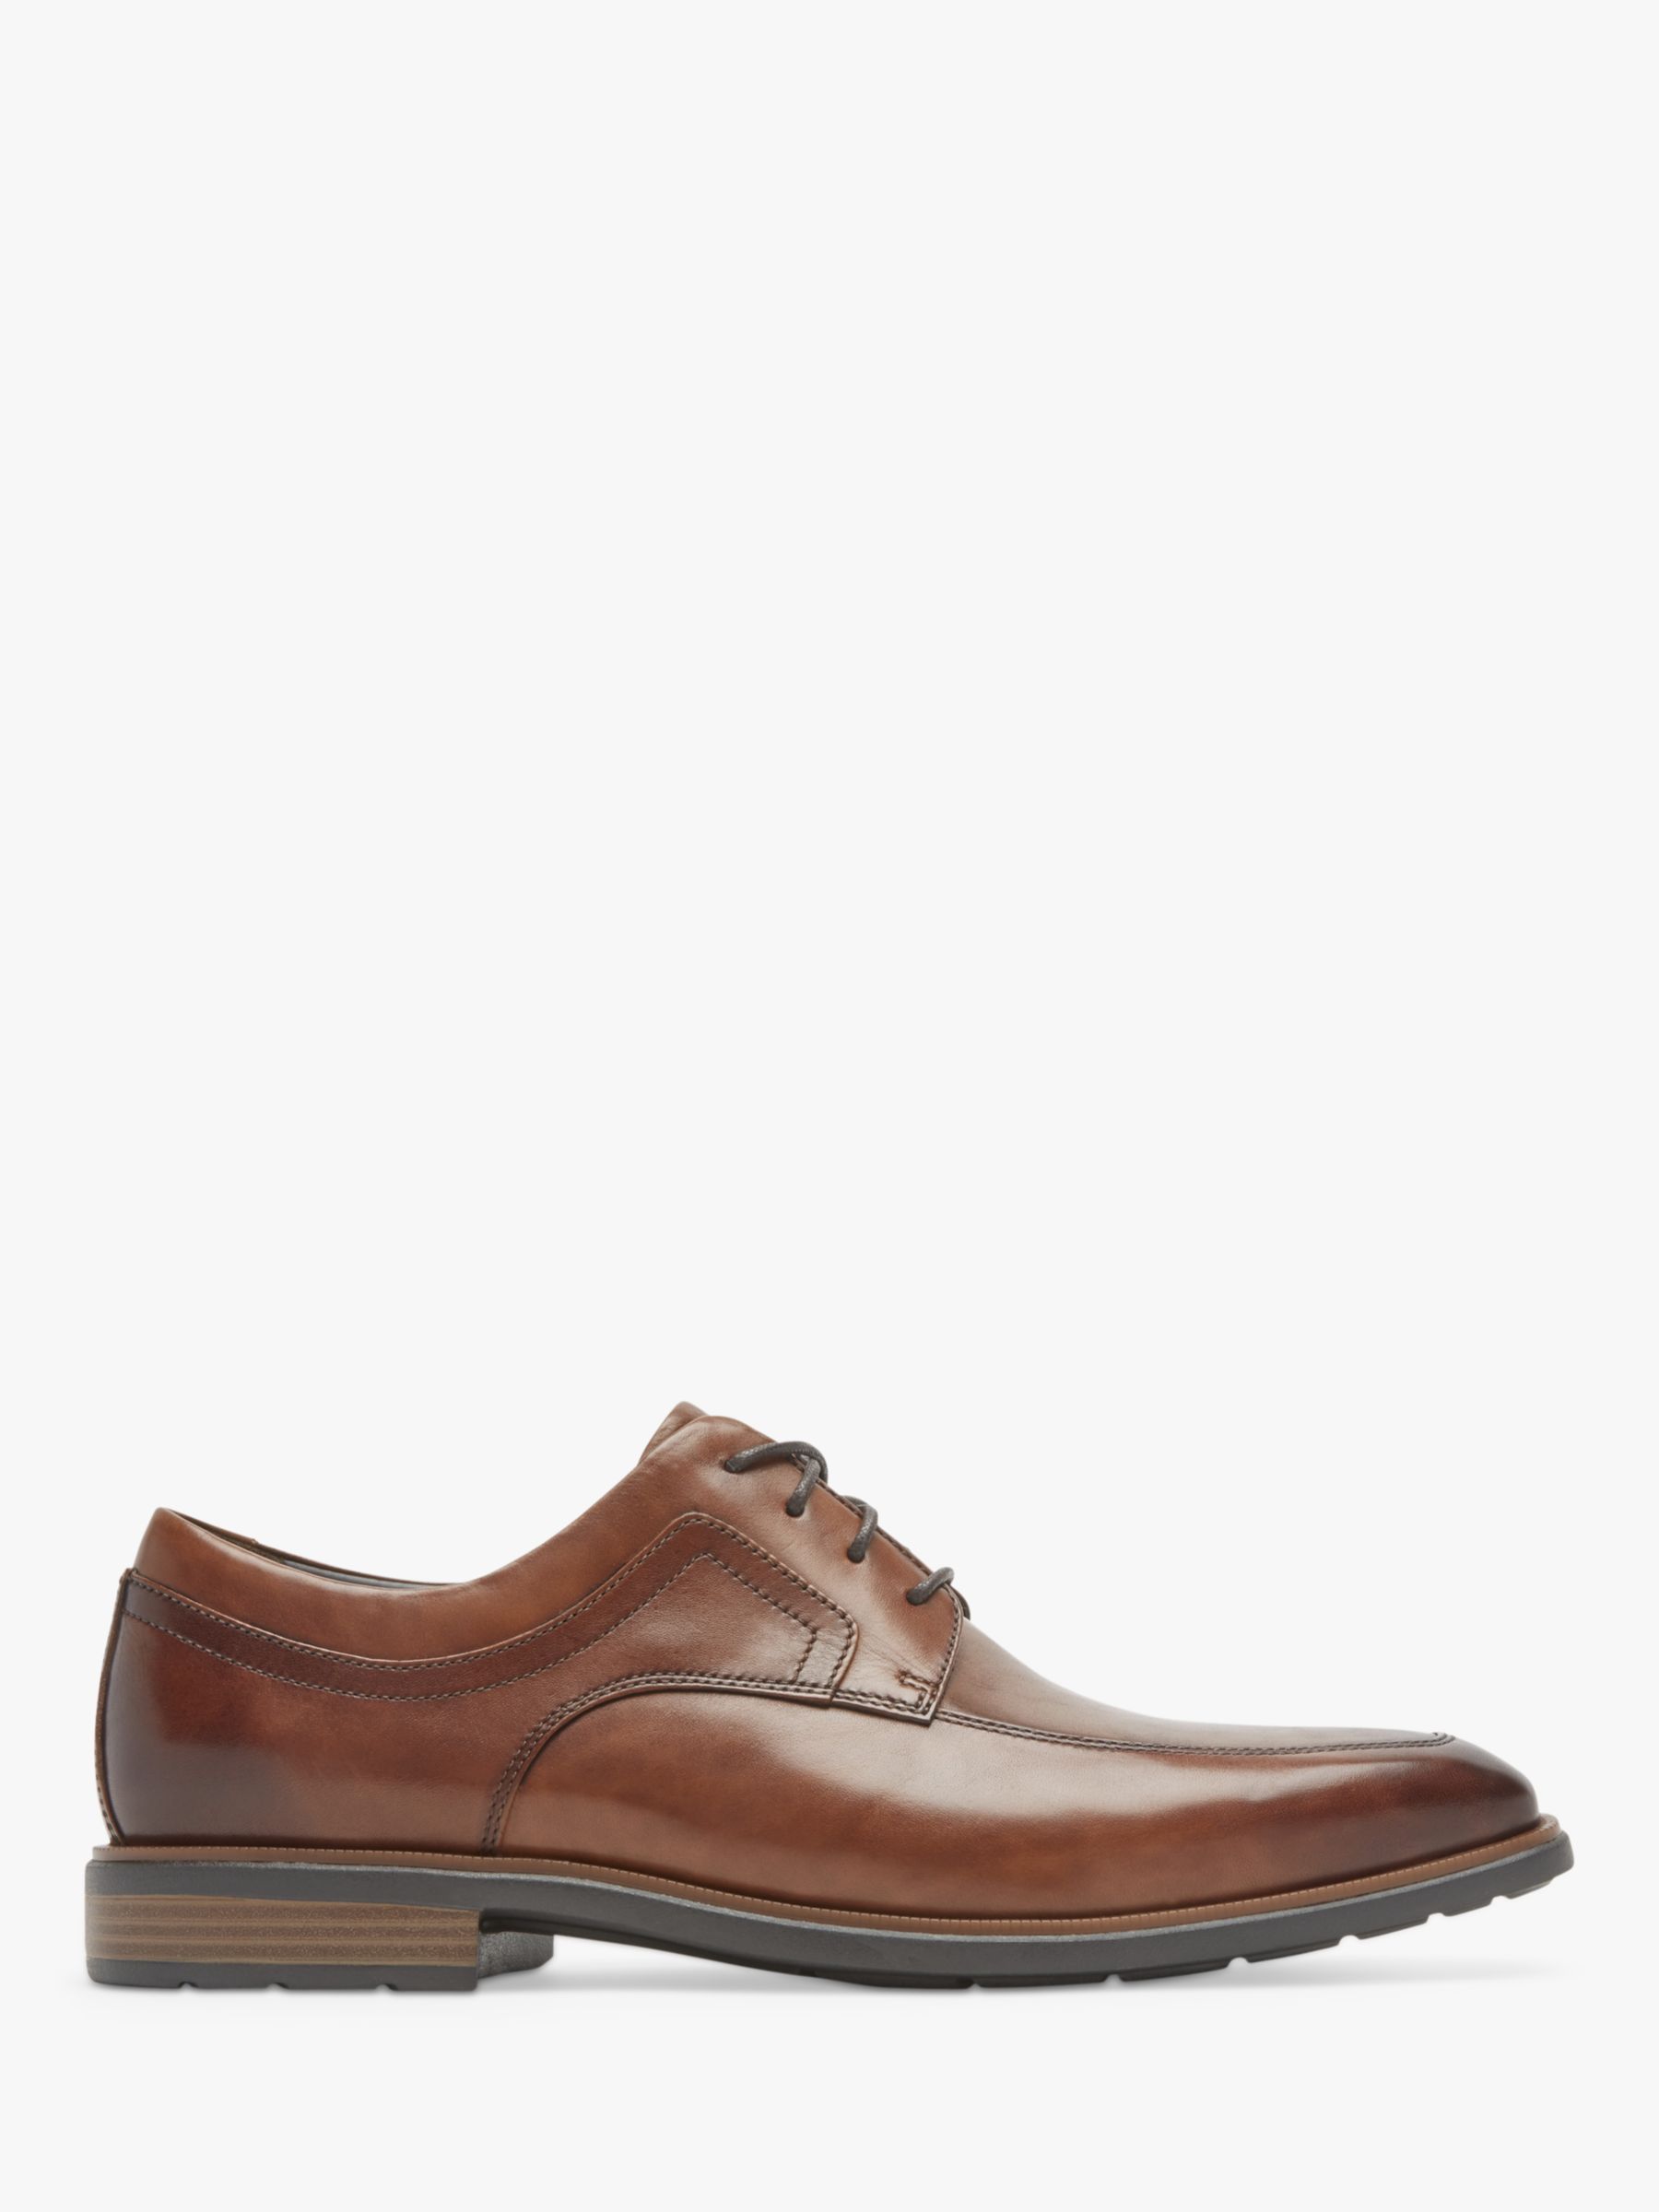 rockport business casual shoes